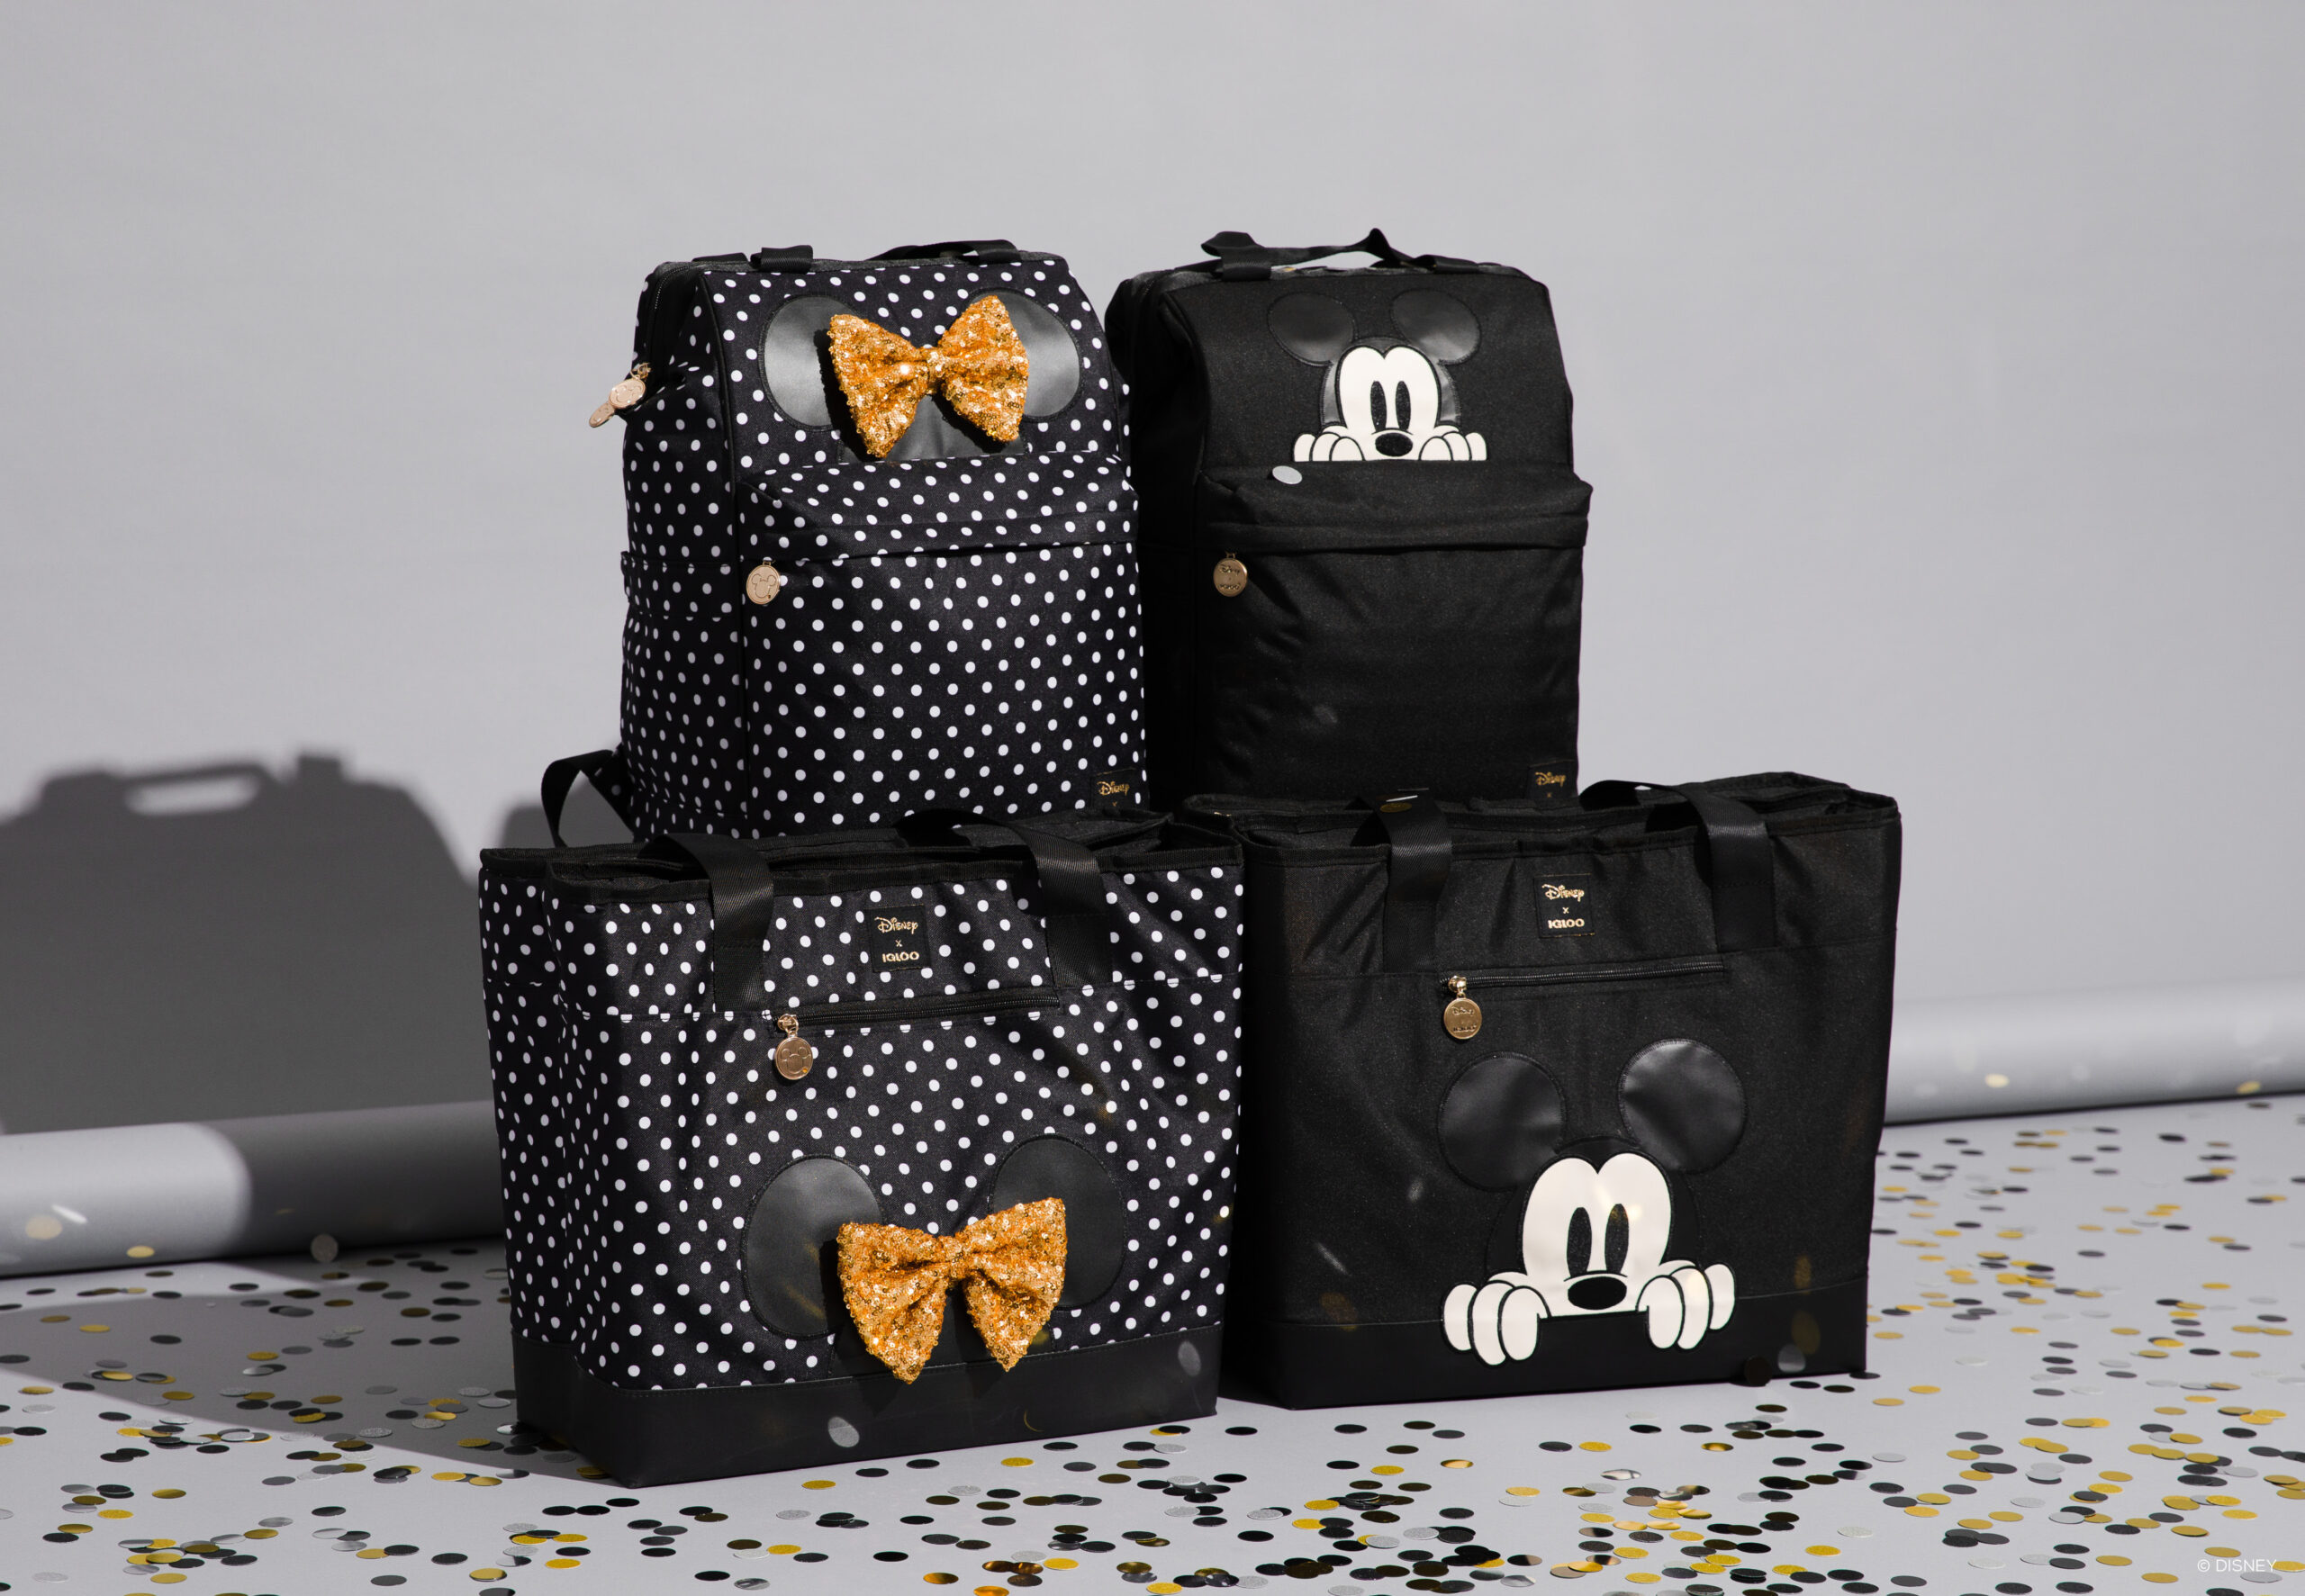 Disney & Igloo expand their line with new cooler bags